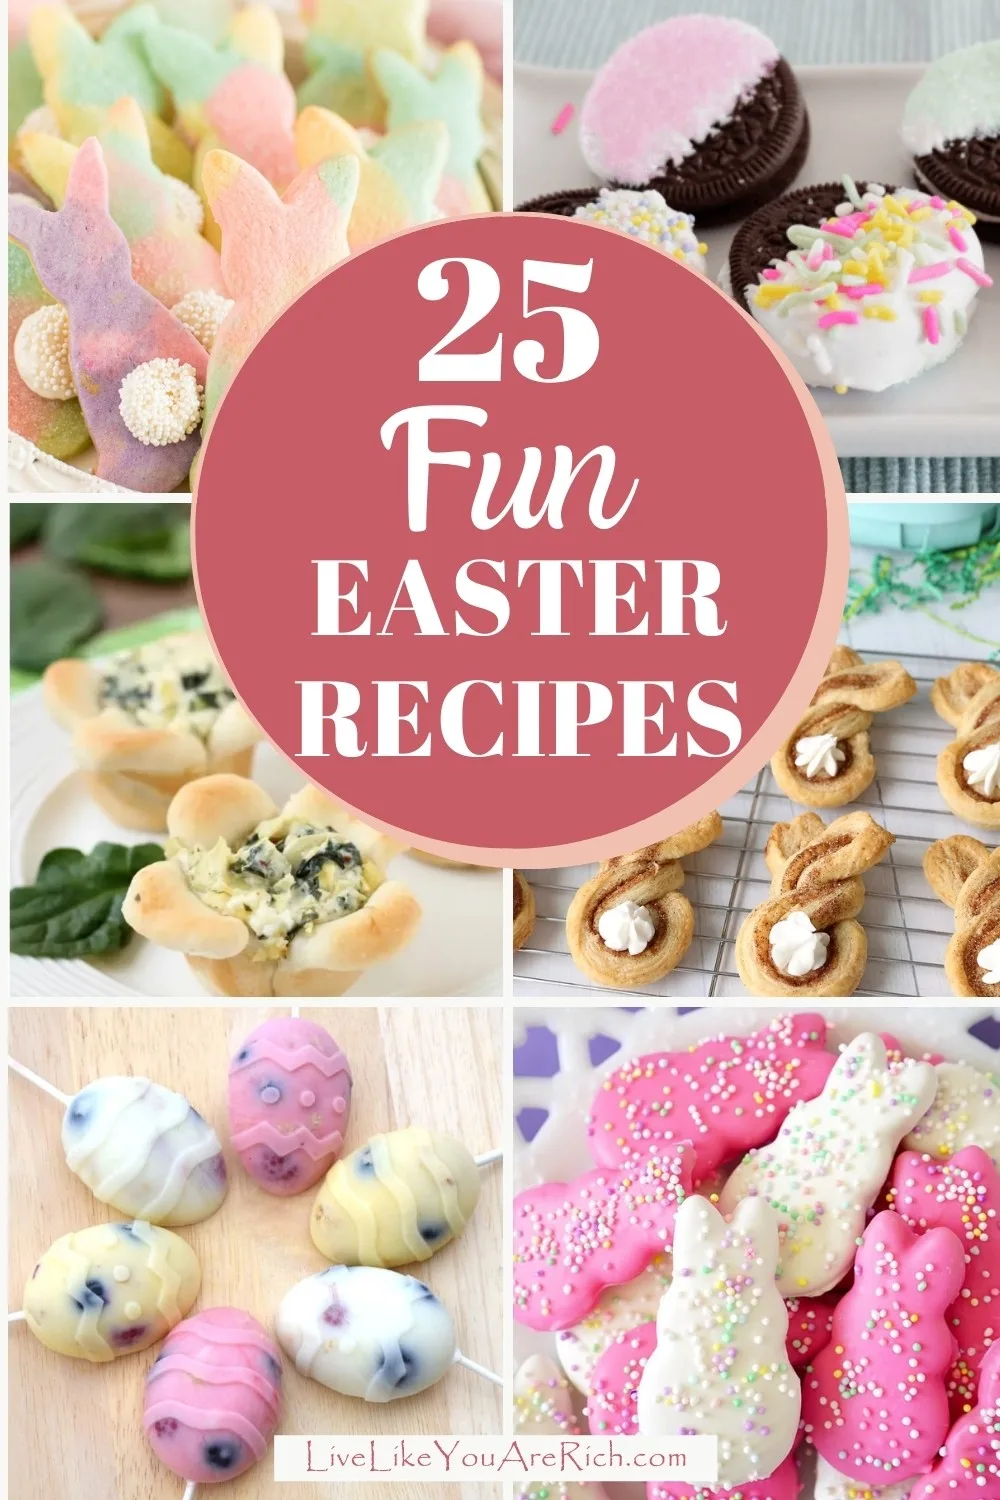 Easter is such a lovely holiday. Making Easter themed recipes are a great way to celebrate as well. Here are 19 Fun Easter Recipes that are great for families with kids!